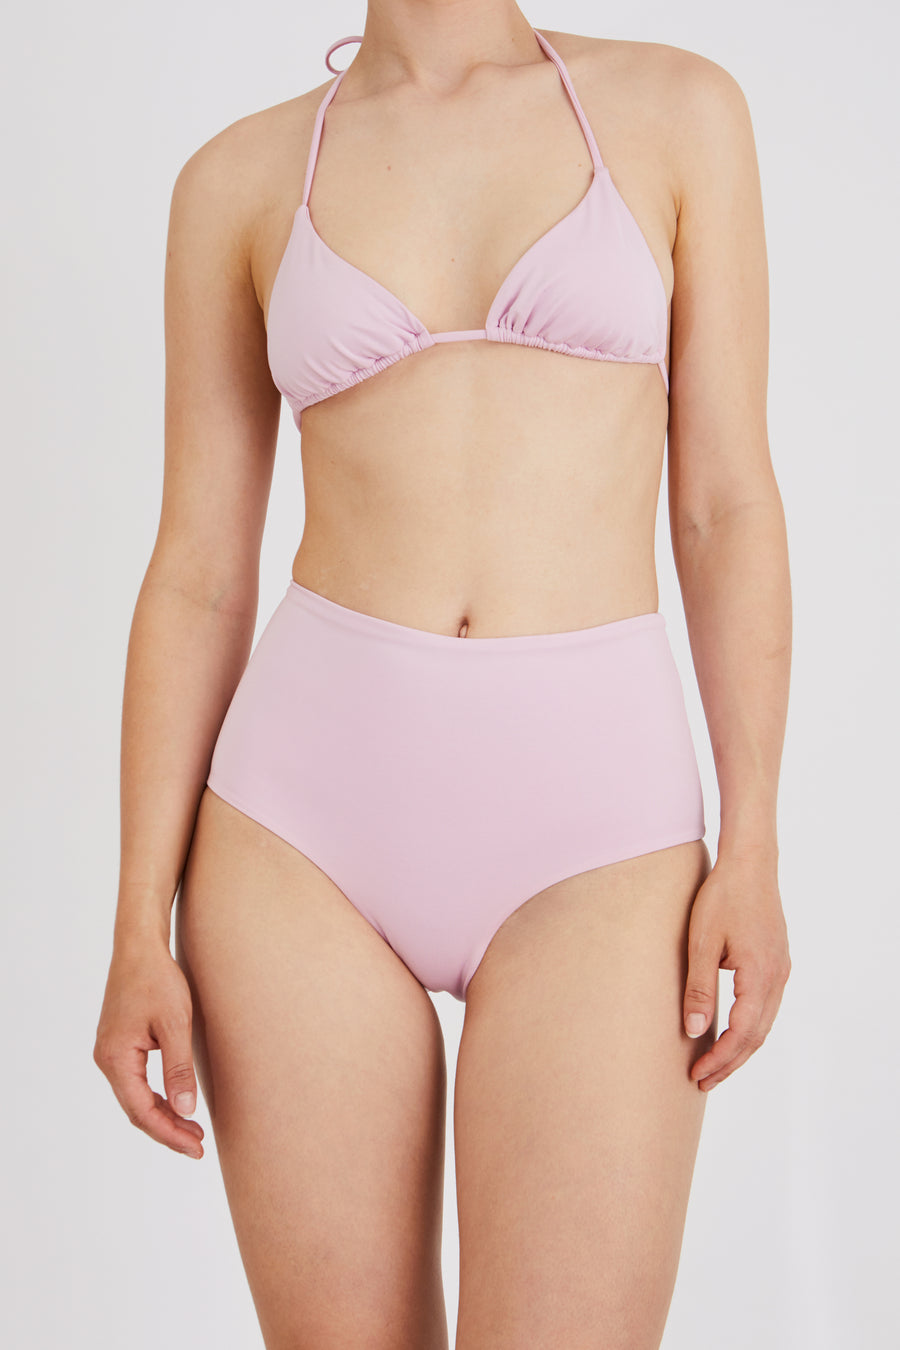 TOP – triangle, pink